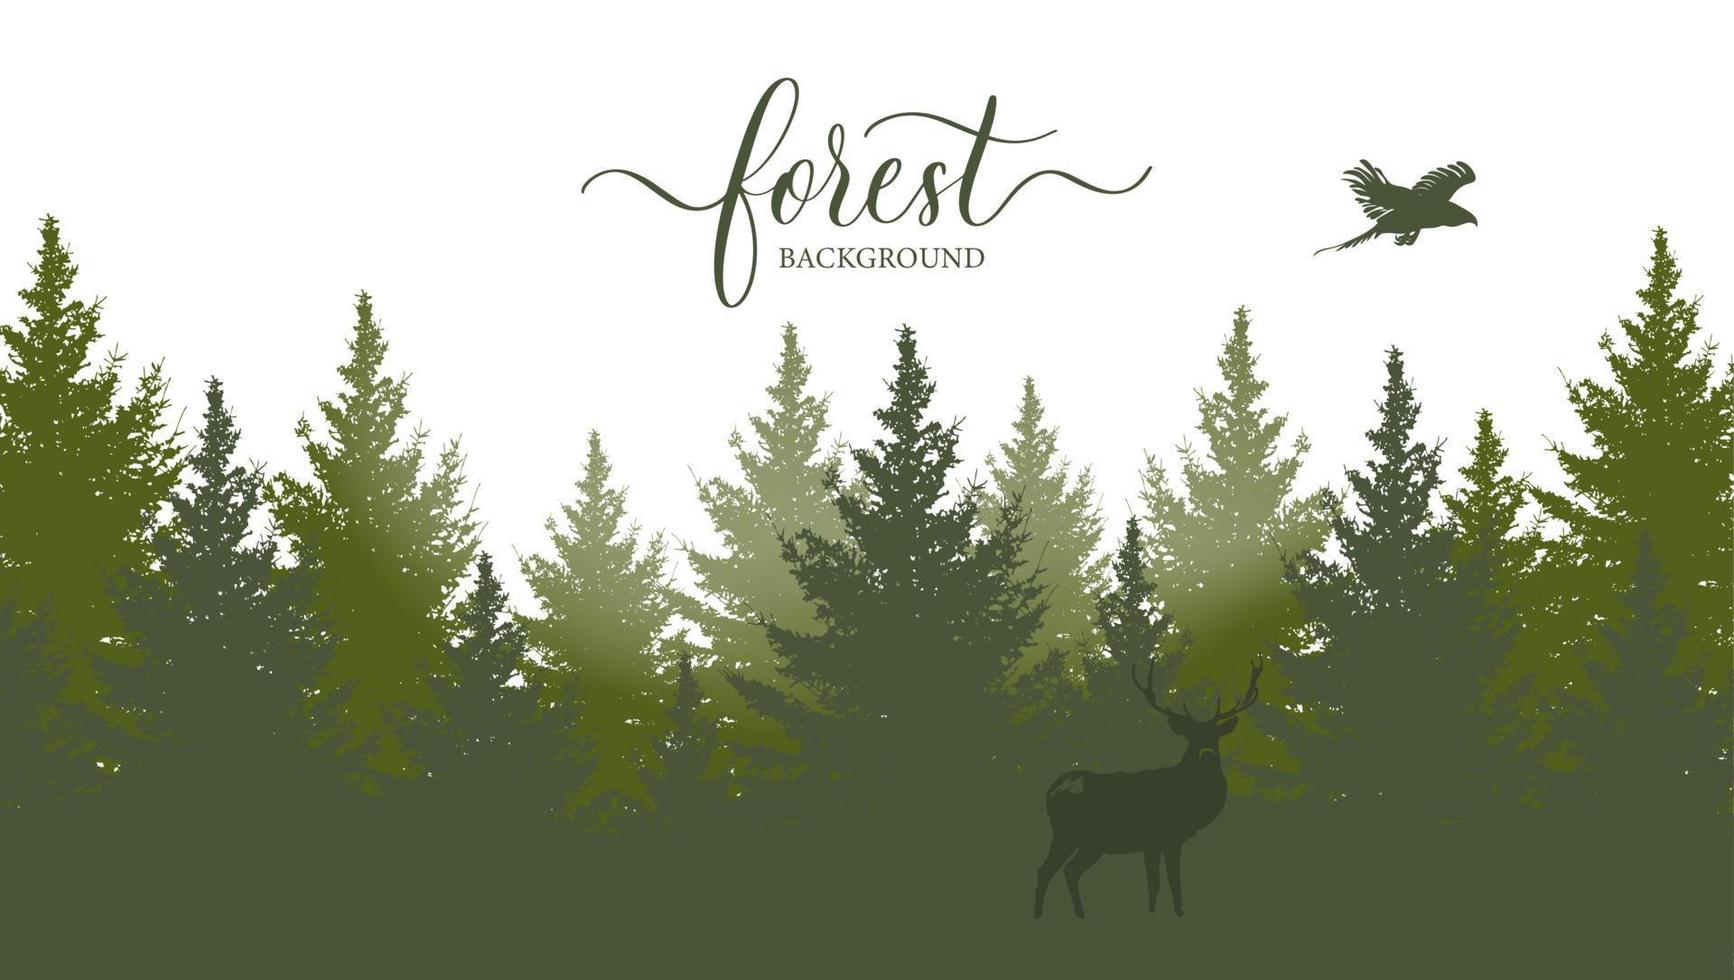 Vector vintage forest landscape with green silhouettes of trees, wild animal deer and eagle bird.